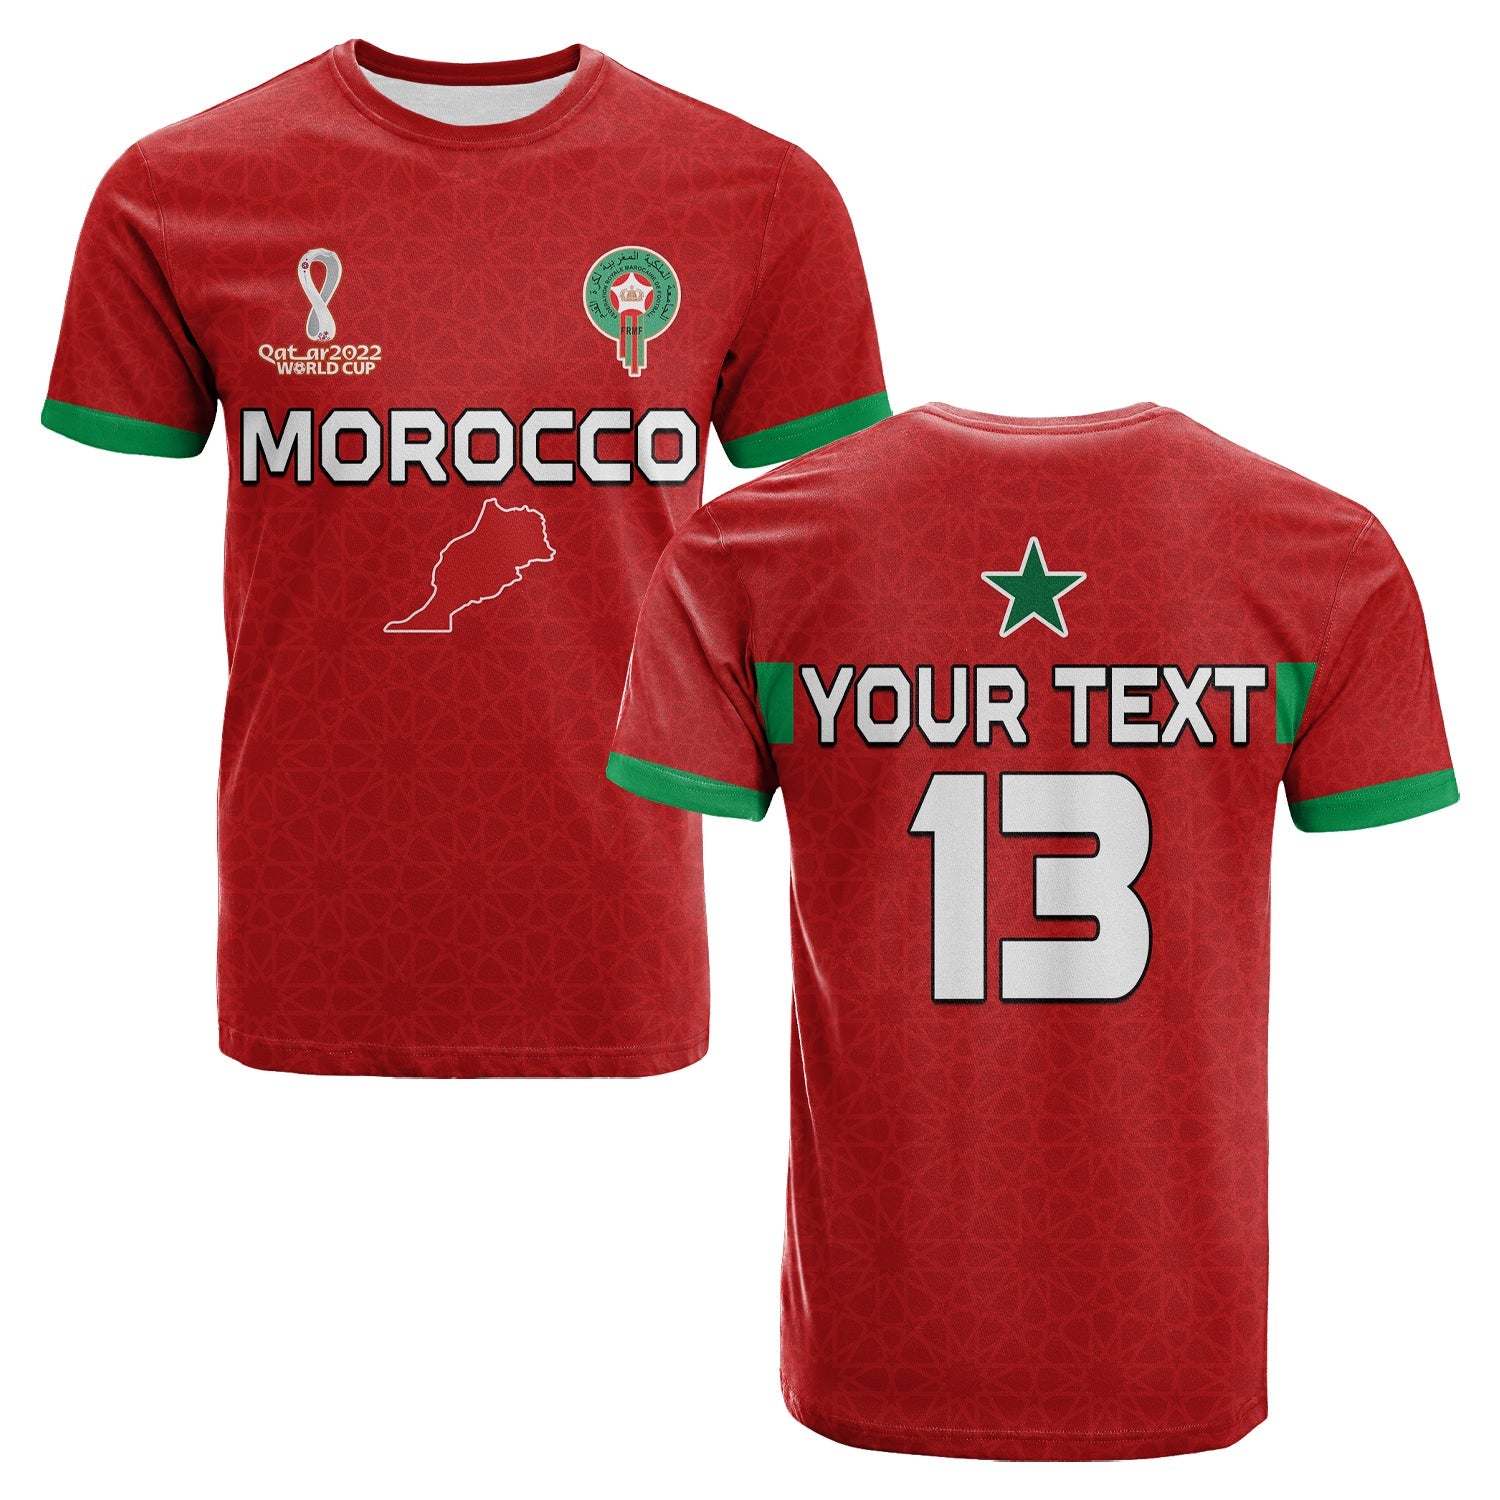 custom-text-and-number-morocco-football-t-shirt-champions-world-cup-soccer-proud